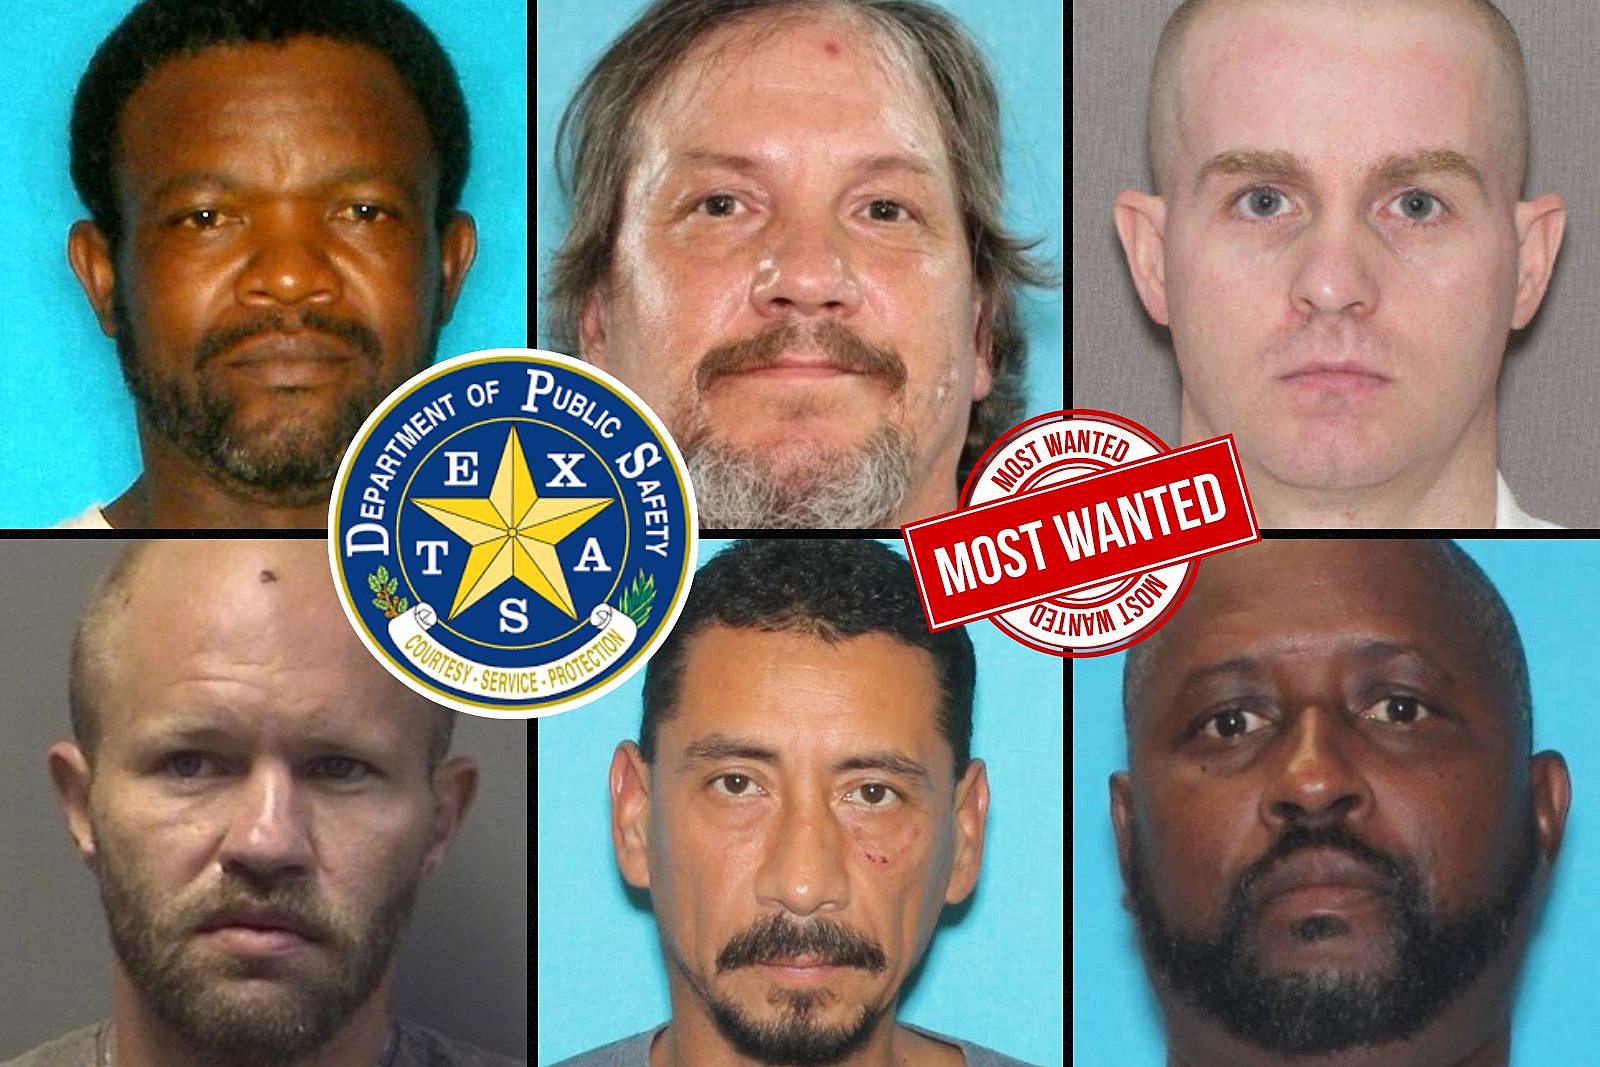 Texas Dps Offering 3k Each For These Wanted Sex Offenders